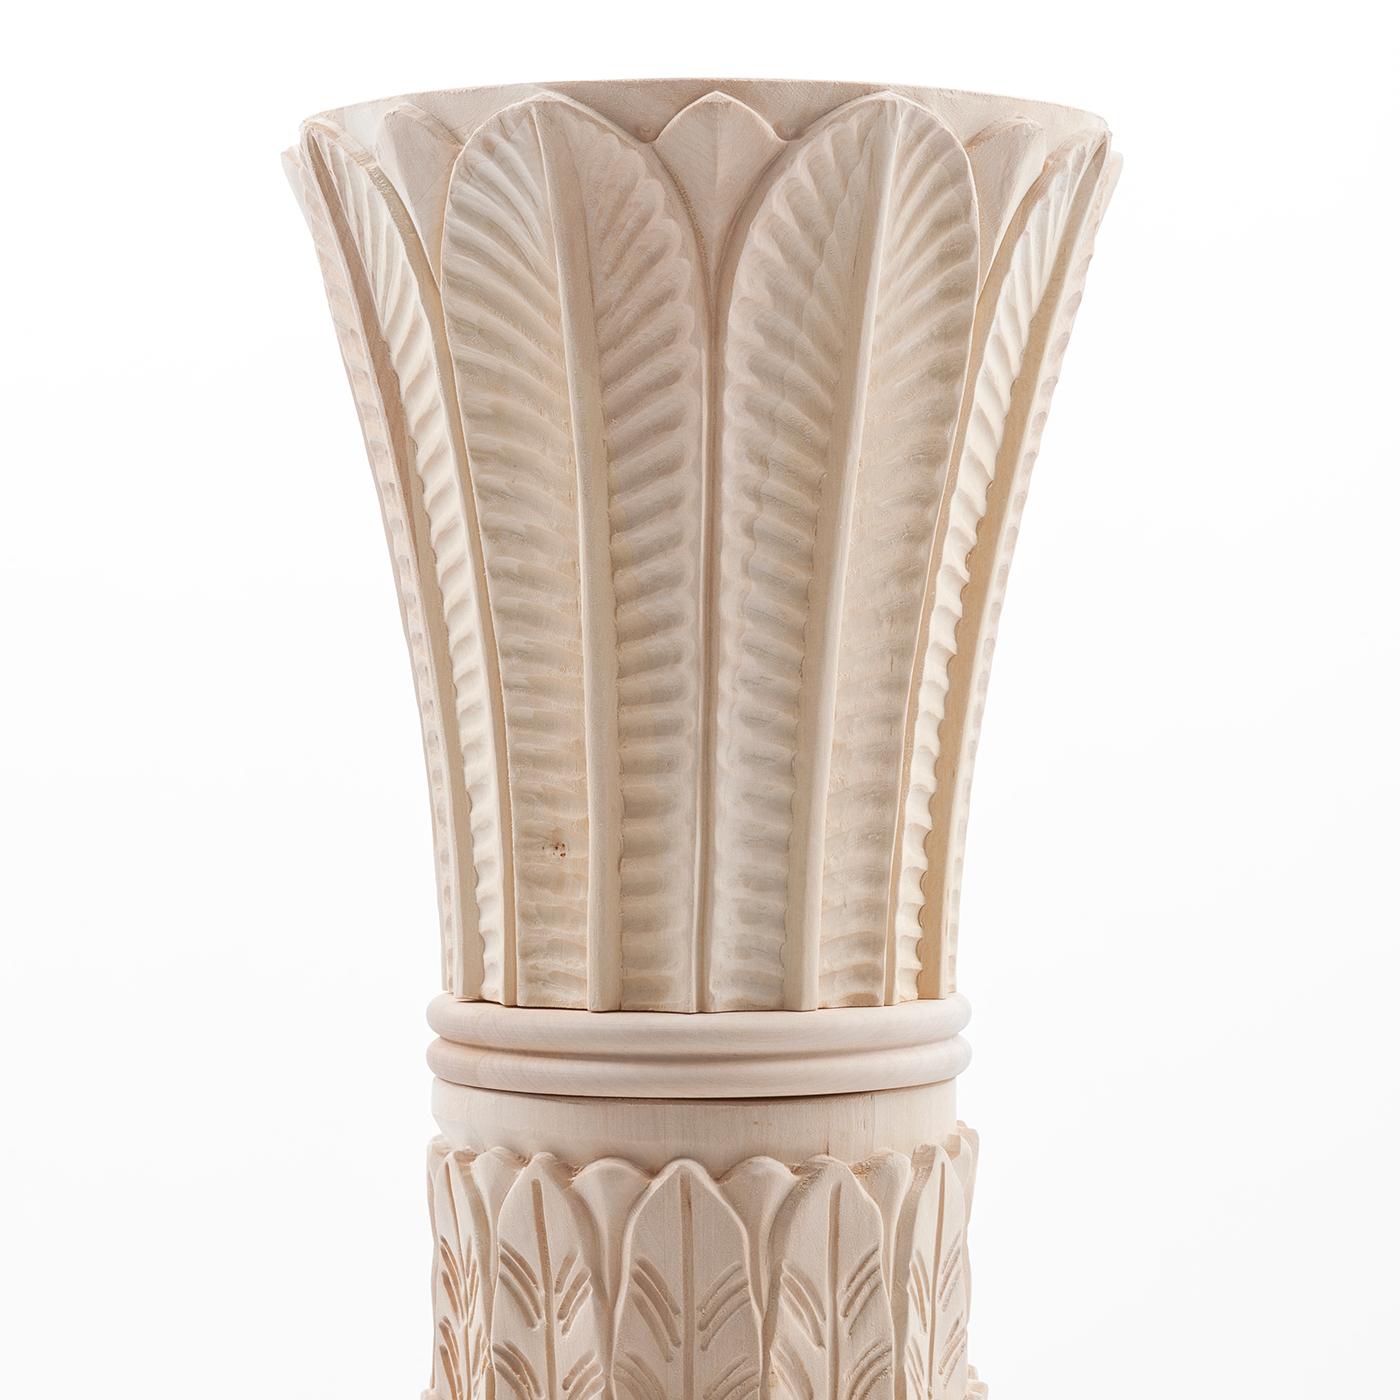 An extraordinary blend of modern techniques and the ancient carving tradition, this decorative column is handmade following a meticulous handcrafting process. Crafted of beige solid wood, the delicate and refined silhouette draws inspiration from a